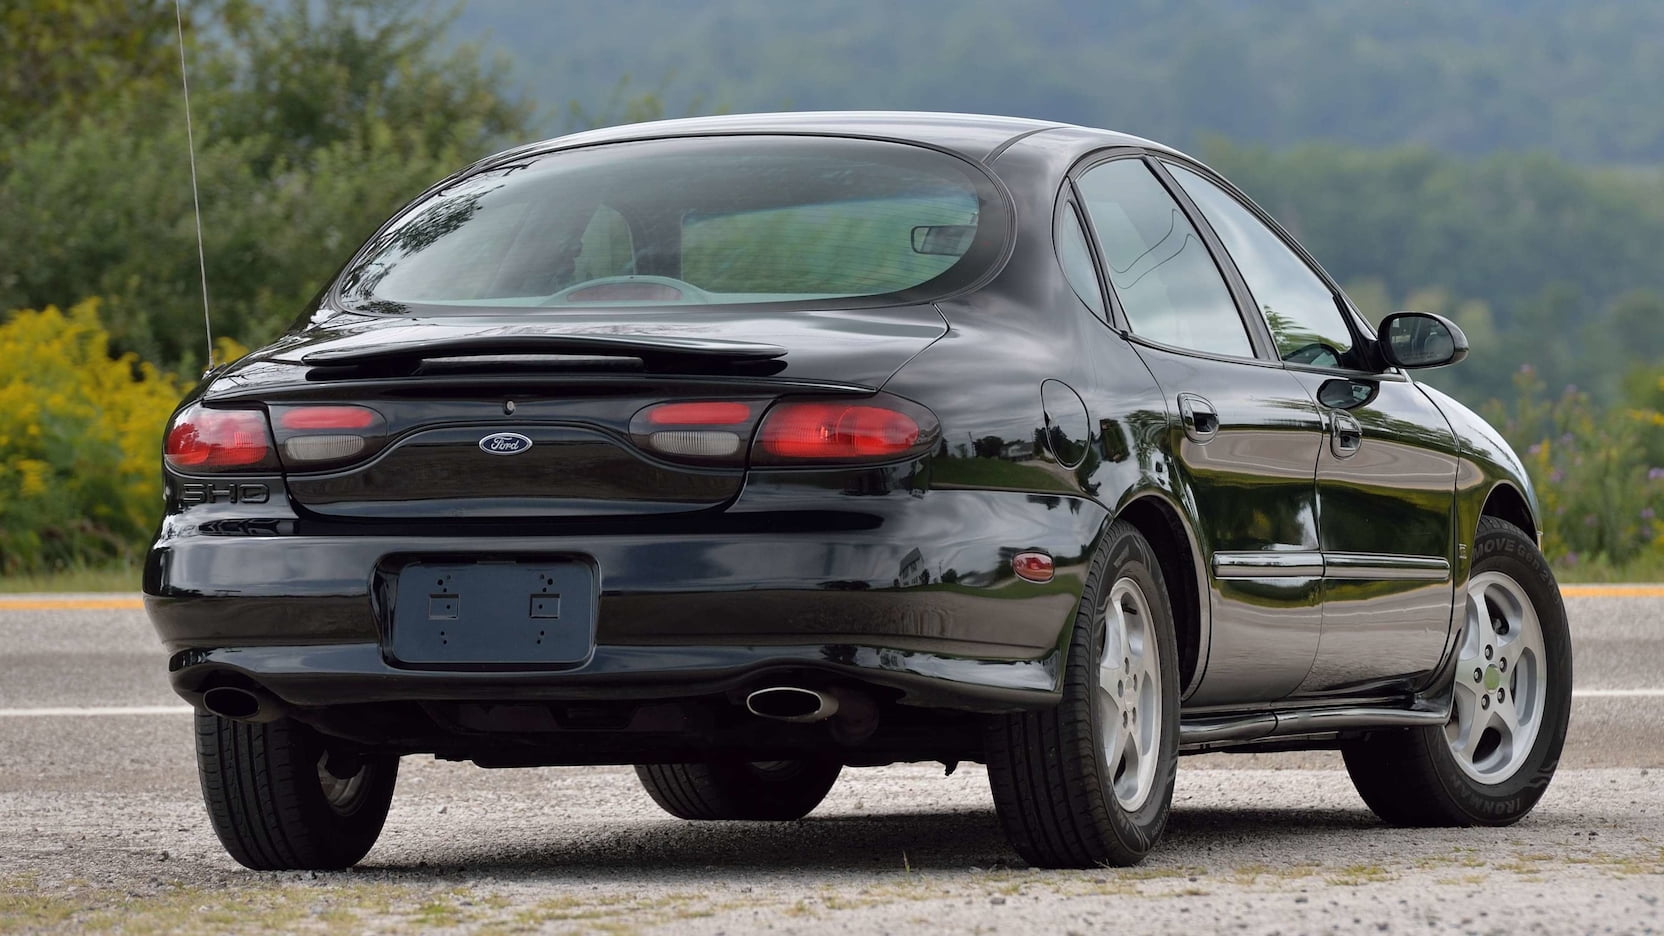 1999 Ford Taurus SHO | F125 | Indy Fall Special 2020